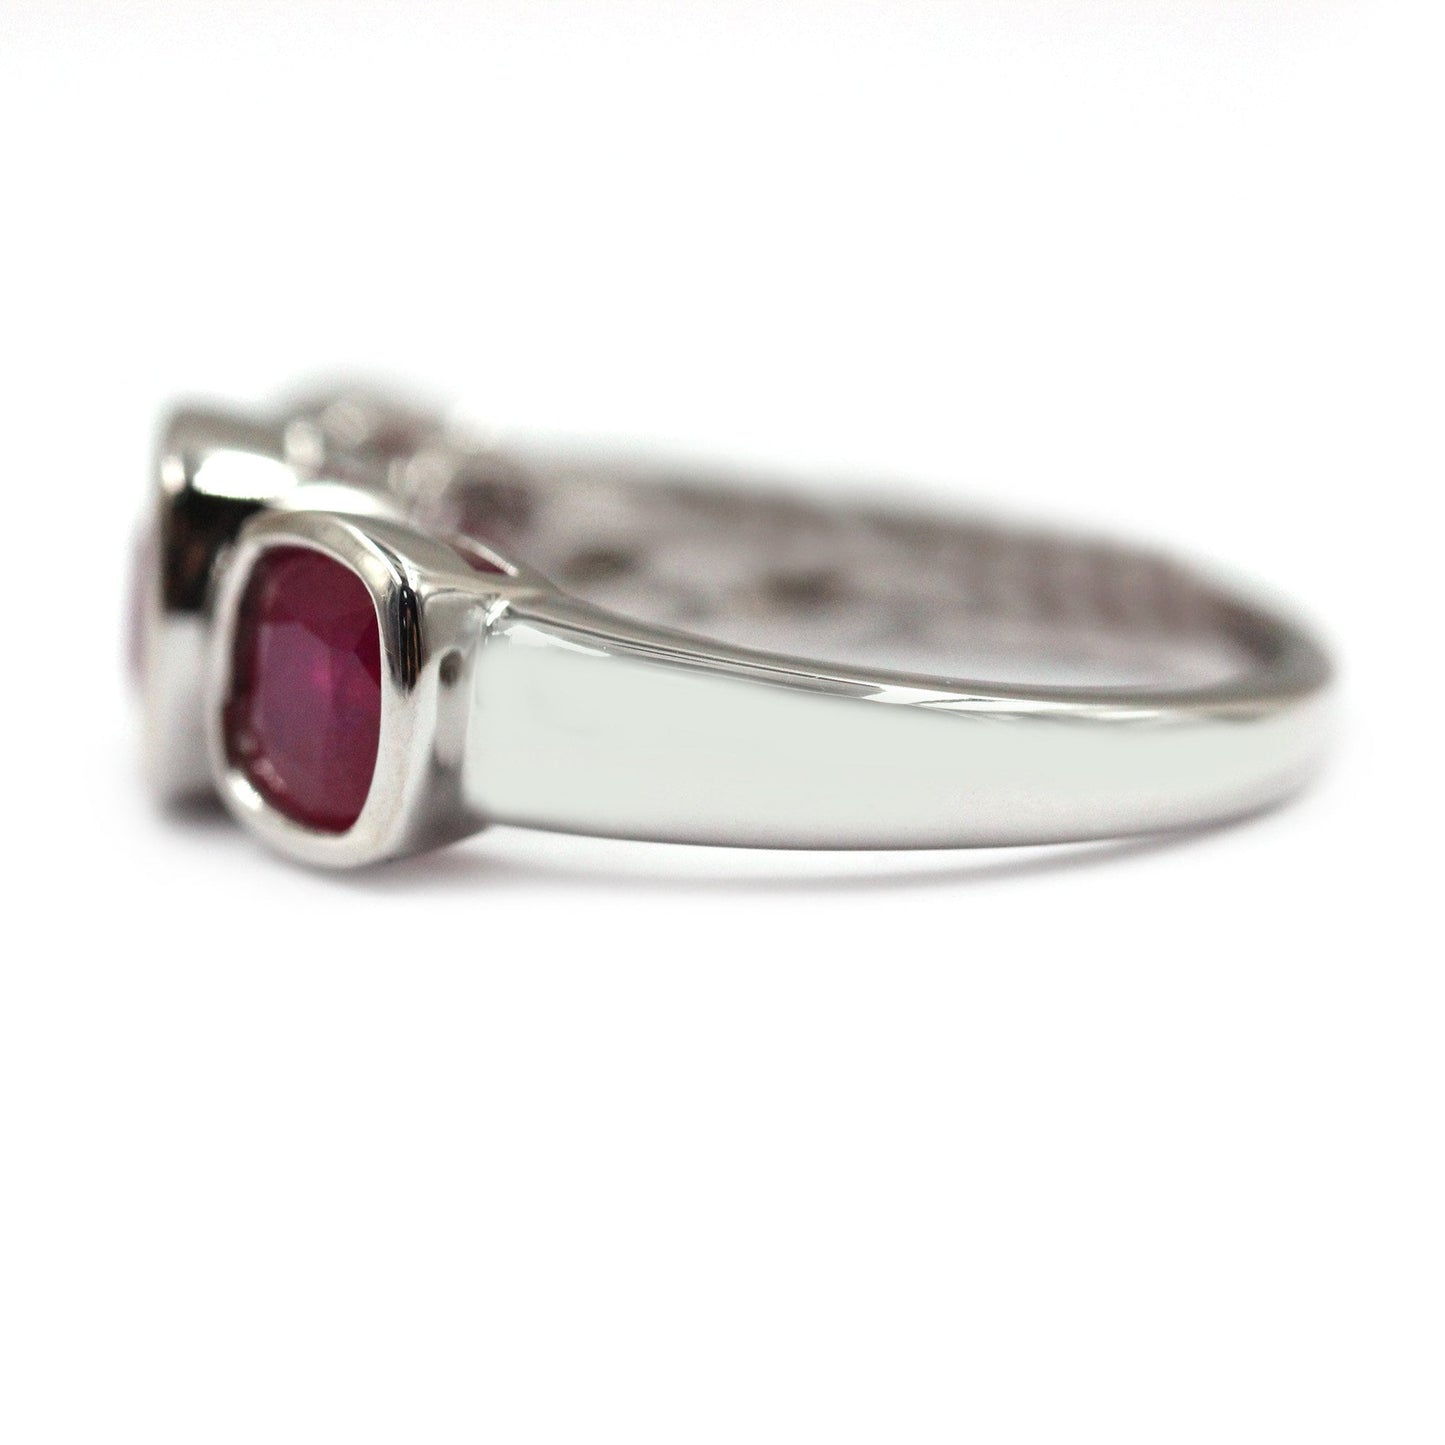 Glass Filled Ruby Gemstone Ring, 925 Sterling Silver Ring, Engagement Ring, Birthstone Jewelry Anniversary Gift-Gift For Her